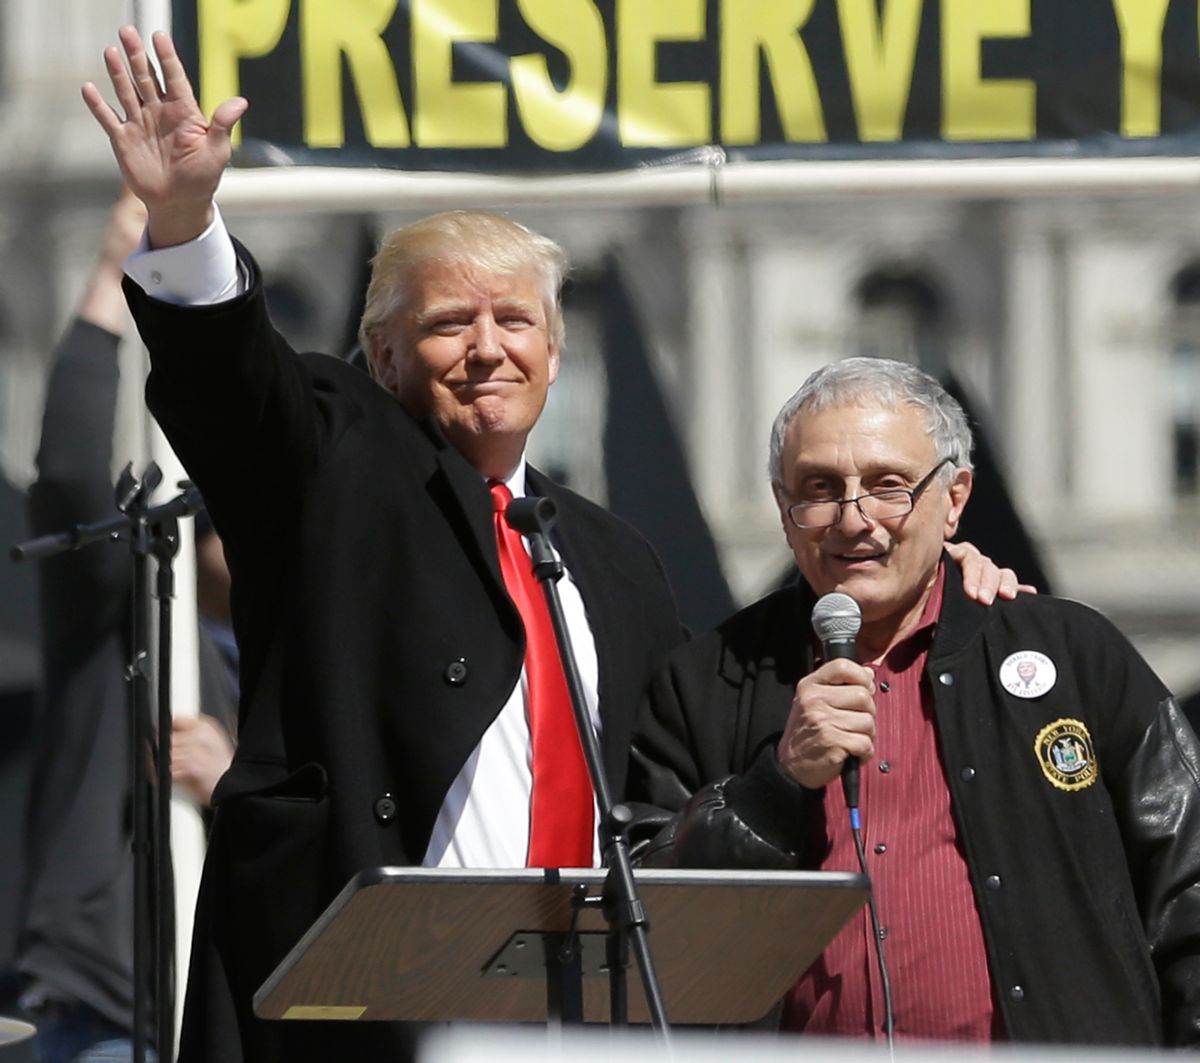 Donald Trump, left, and Carl Paladino, who ran for governor of New York as a Republican in 2010, speak during a gun rights rally at the Empire State Plaza on Tuesday, April 1, 2014, in Albany, N.Y. Activists are seeking a repeal of a 2013 state law that outlawed the sales of some popular guns like the AR-15. The law championed by Gov. Andrew Cuomo has been criticized as unconstitutional by some gun rights activists. (AP Photo/Mike Groll)  (AP)